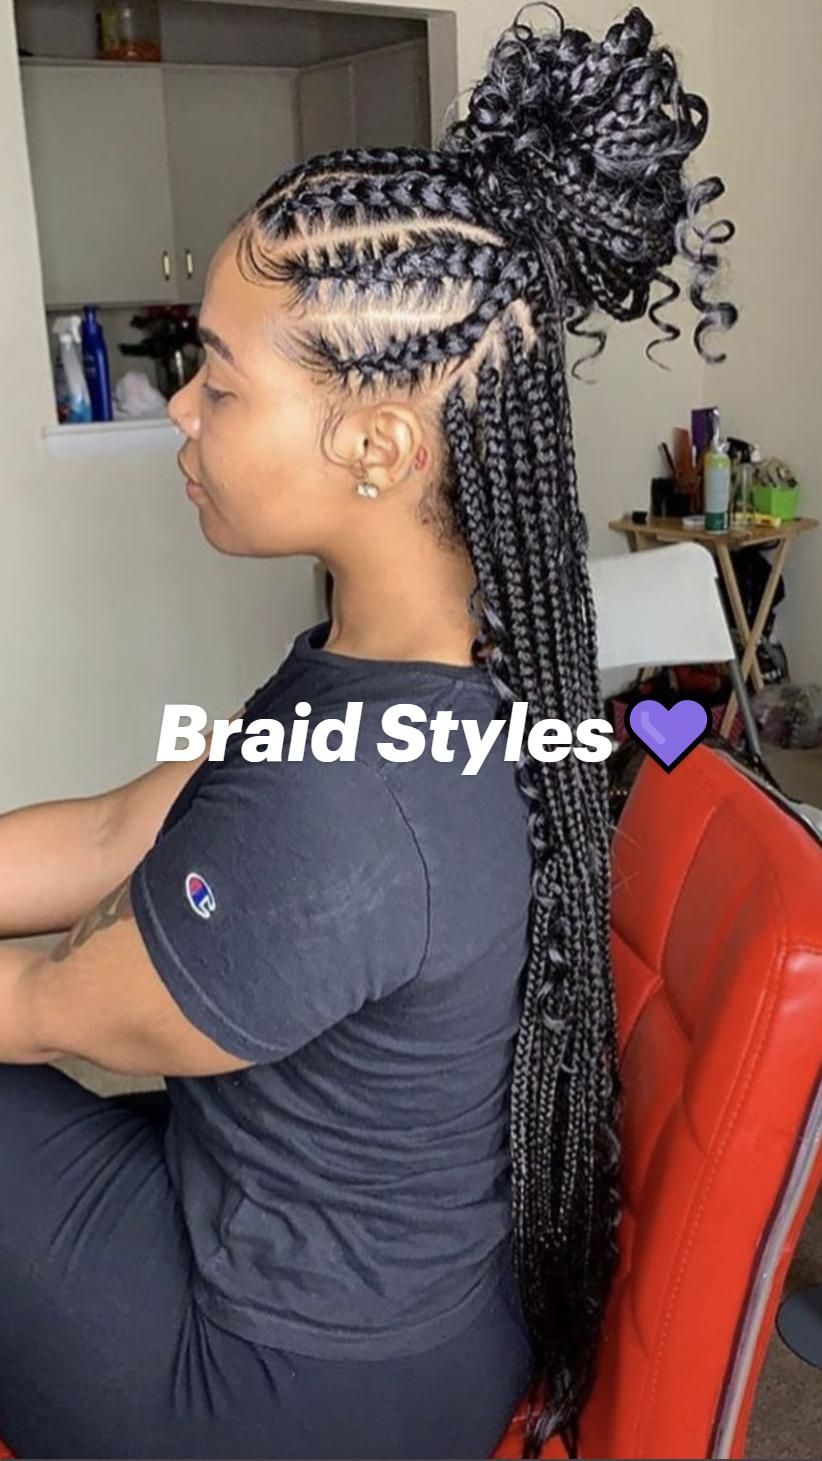 This contains an image of Braid Styles💜